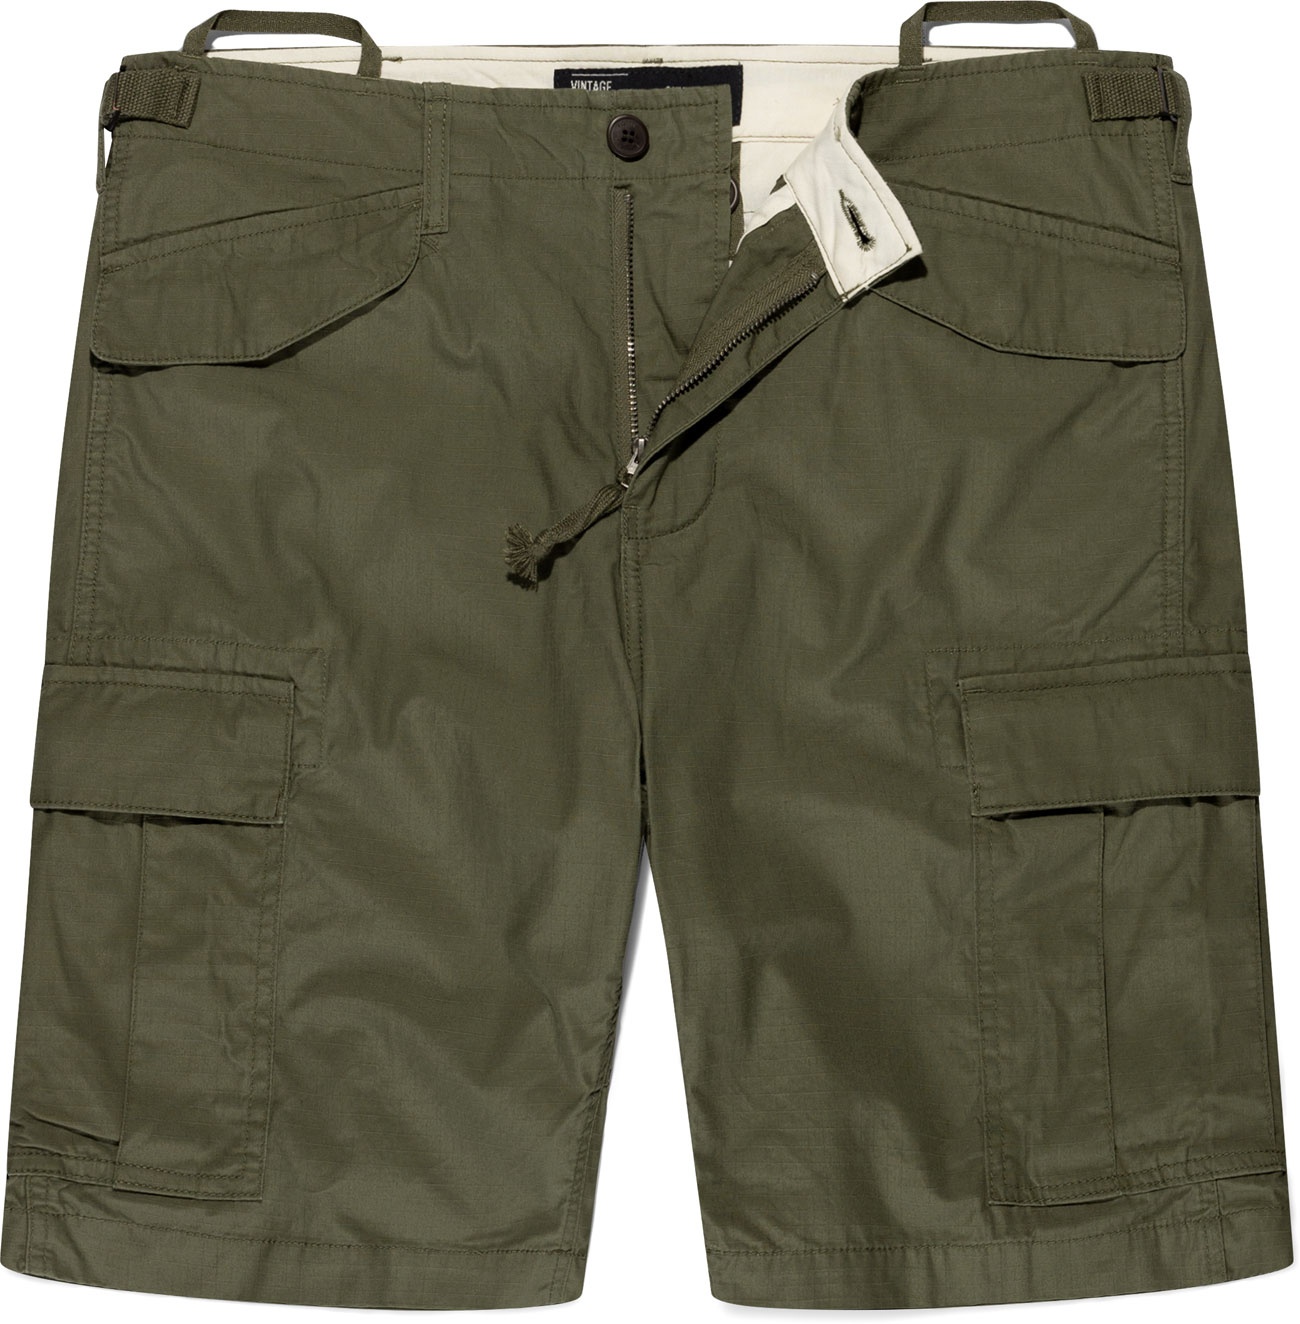 Vintage Industries Anderson, short cargo - Clair Olive - S